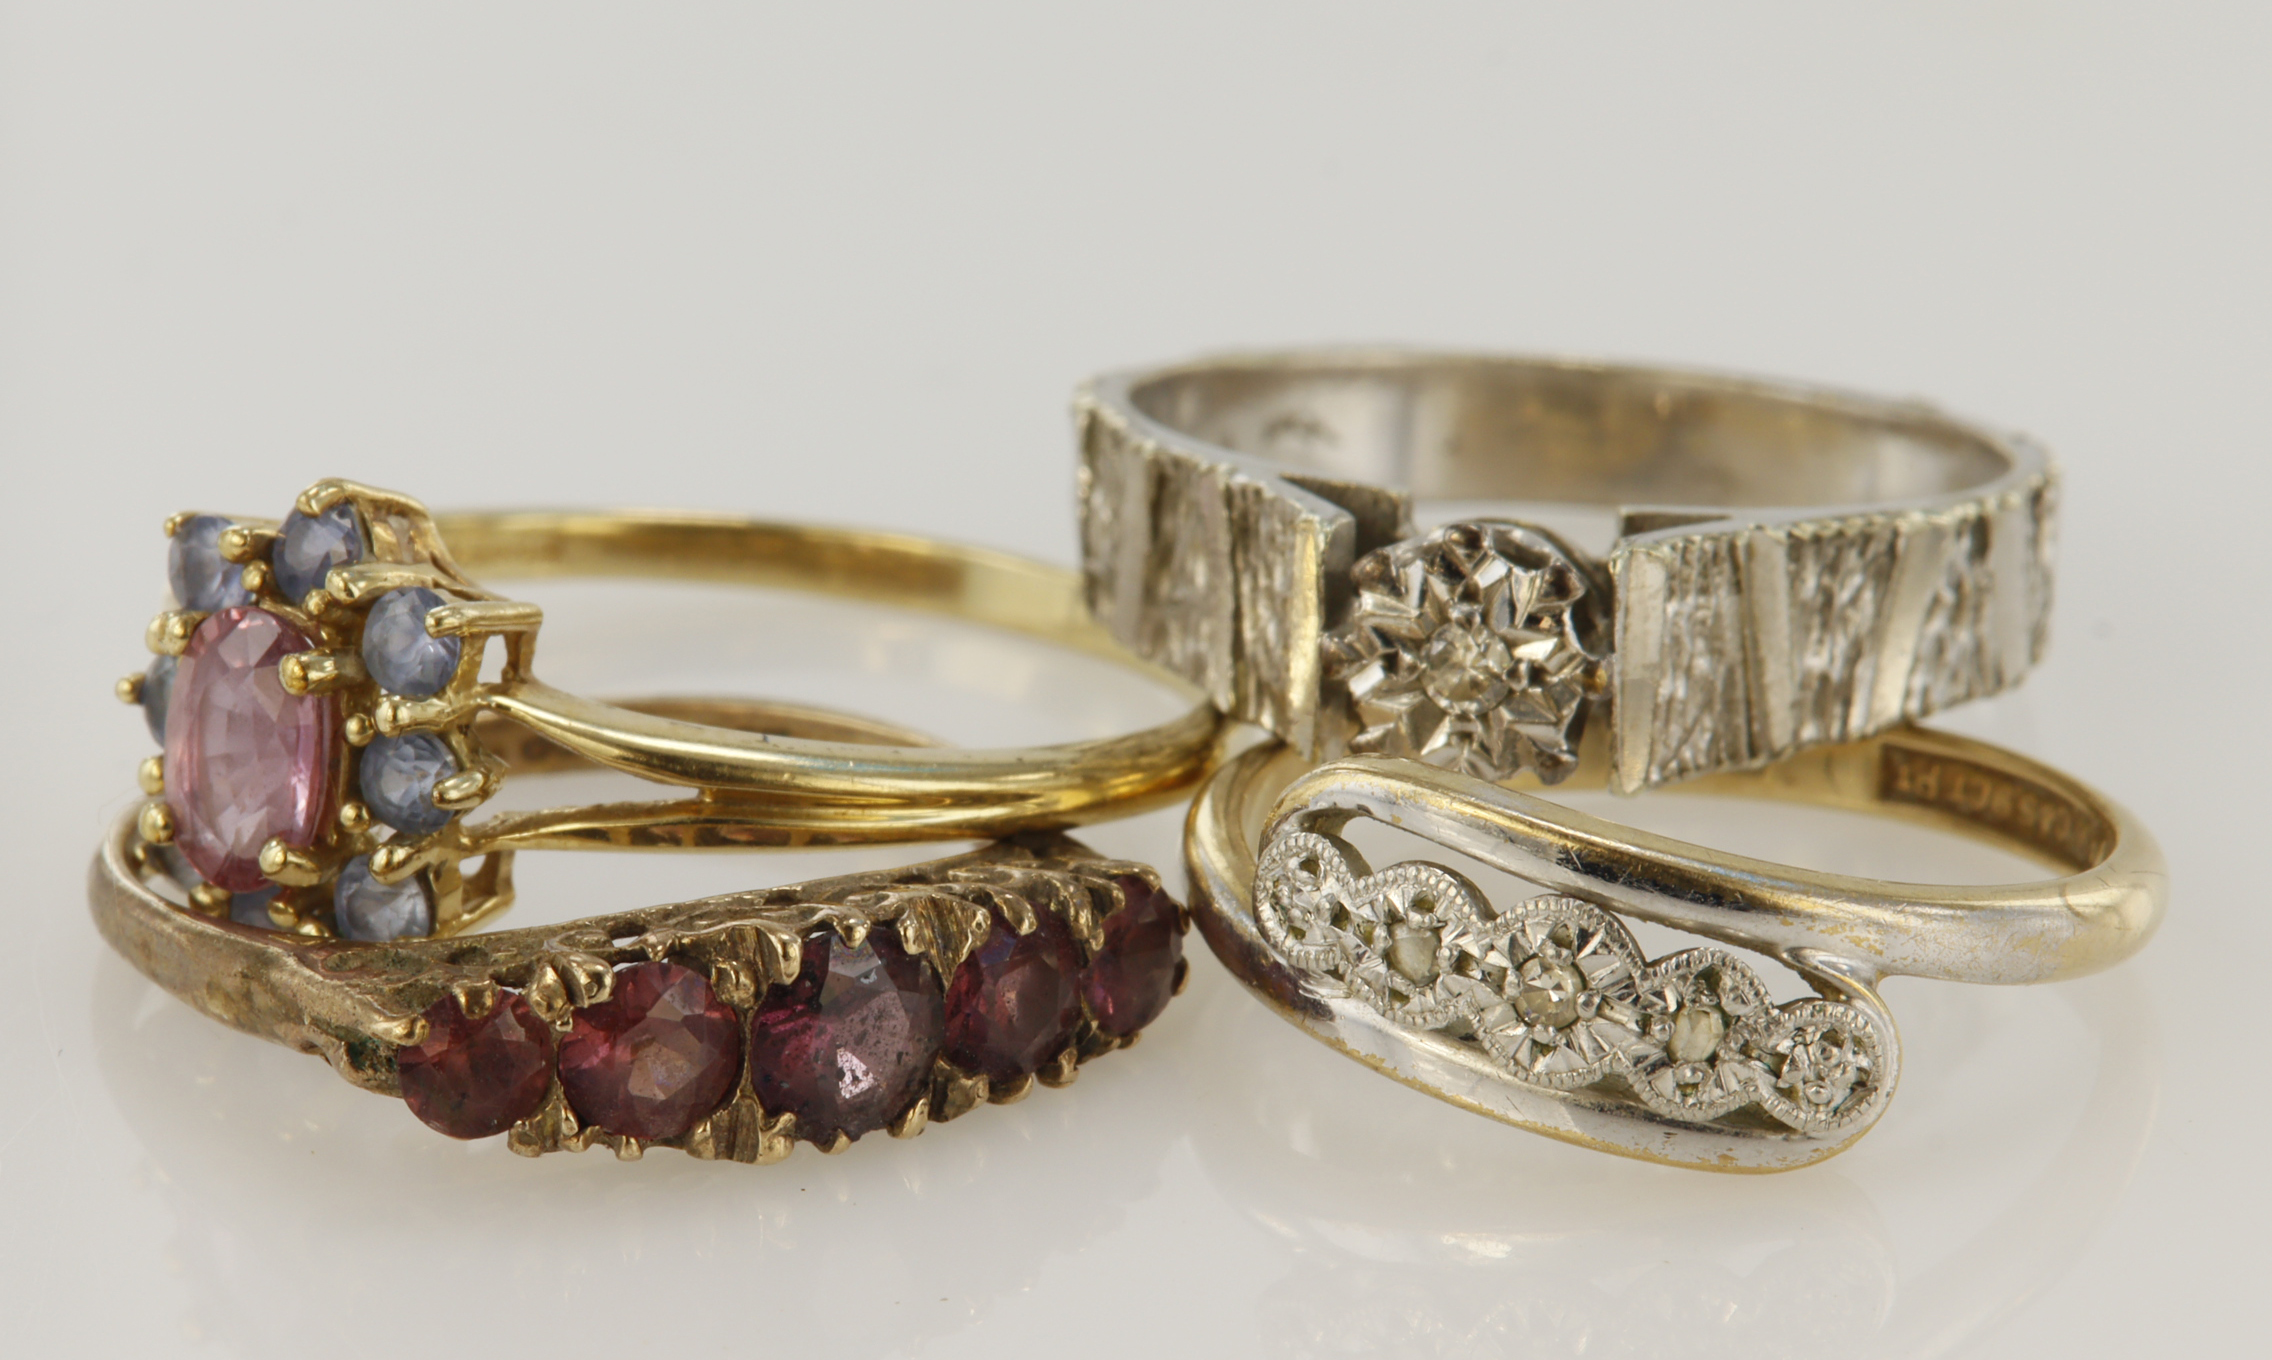 Four 9ct gold/tests 9ct dress rings, stones include diamond, ruby, sapphire, garnet, finger sizes M,